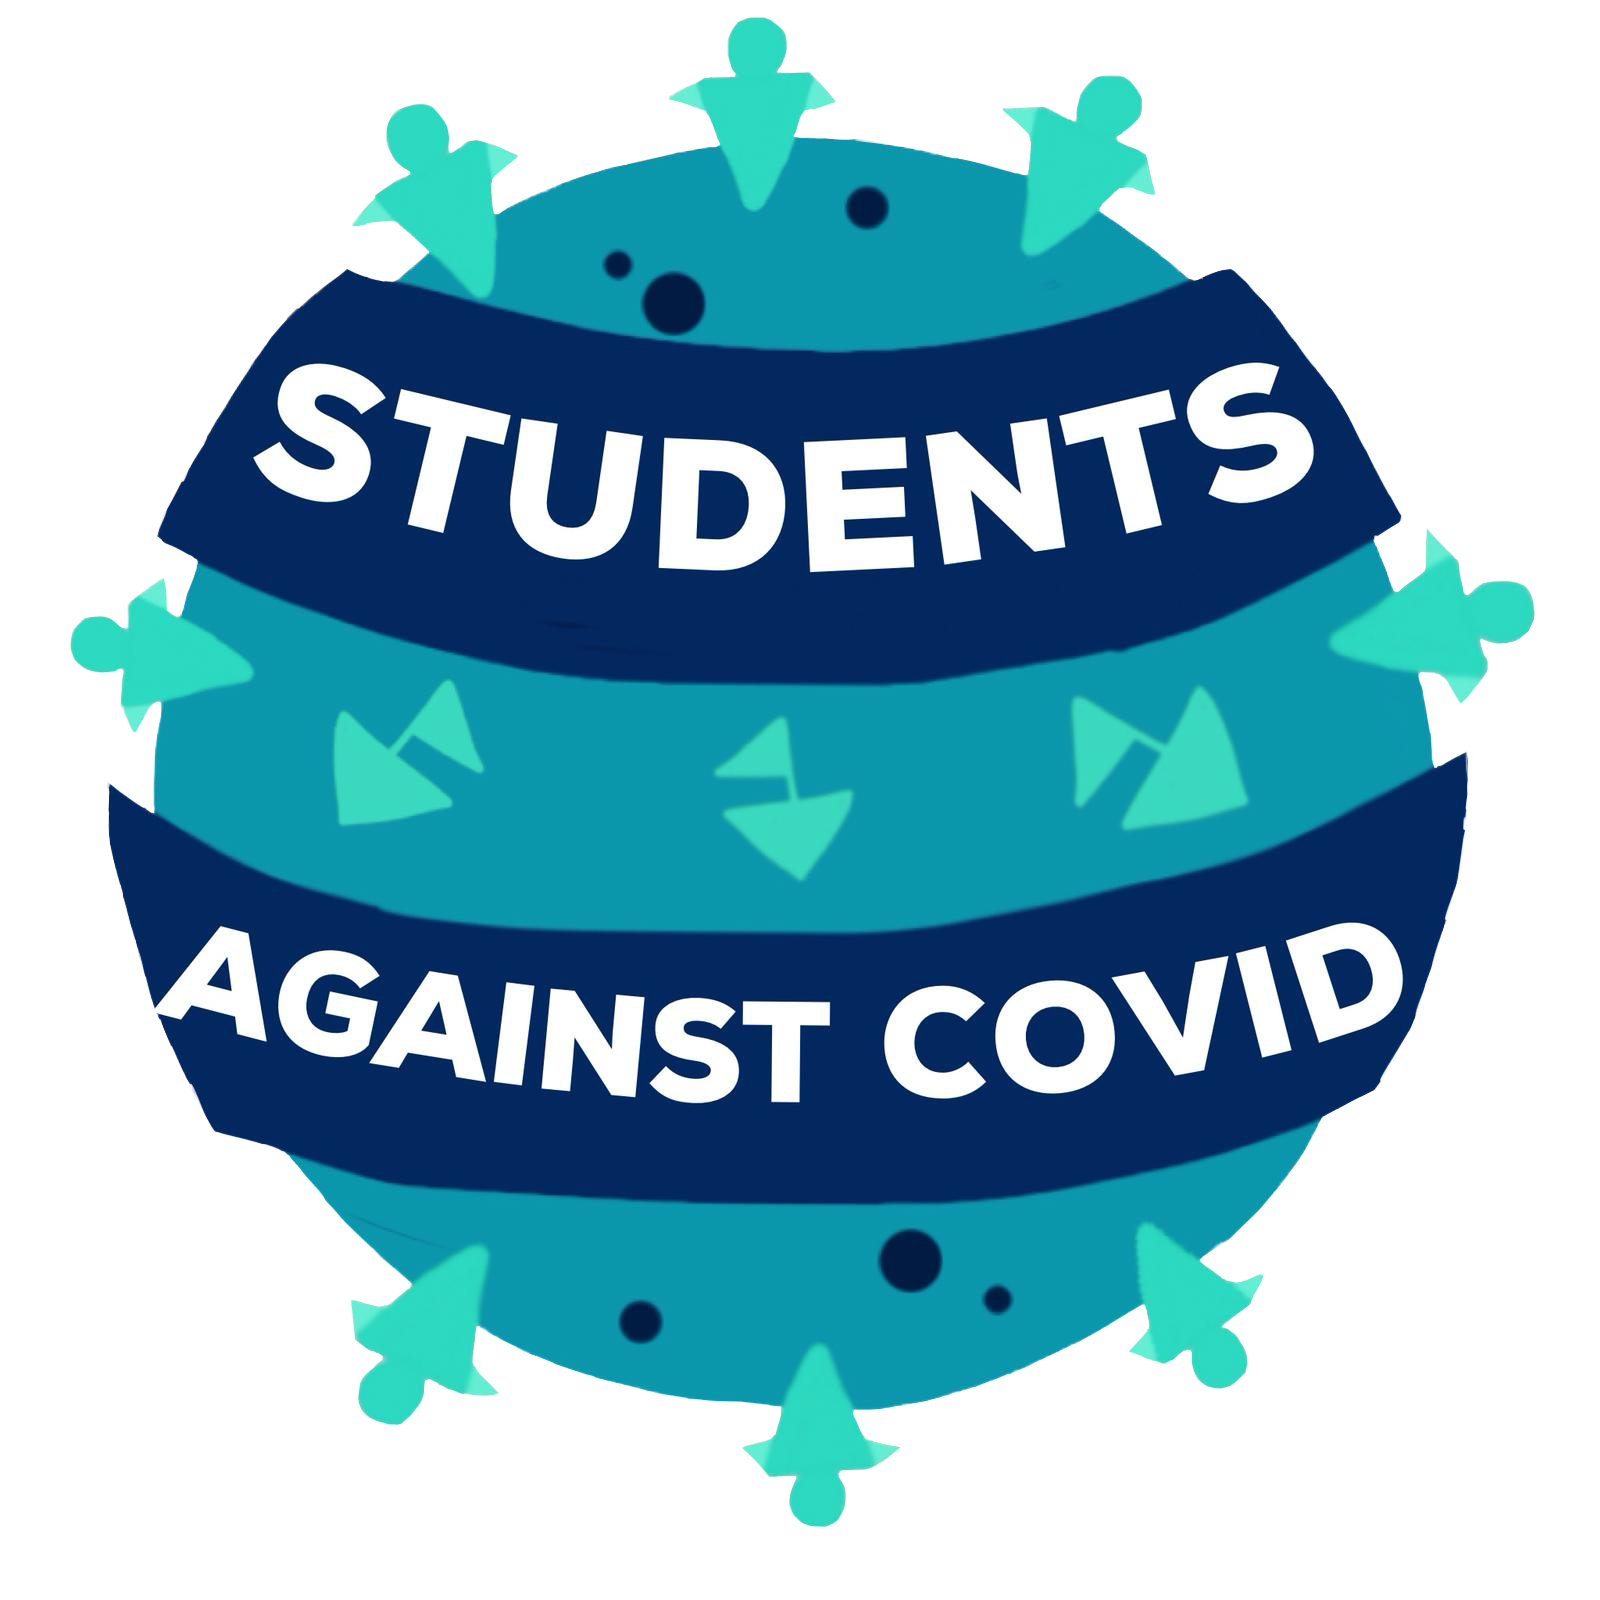 Students against COVID